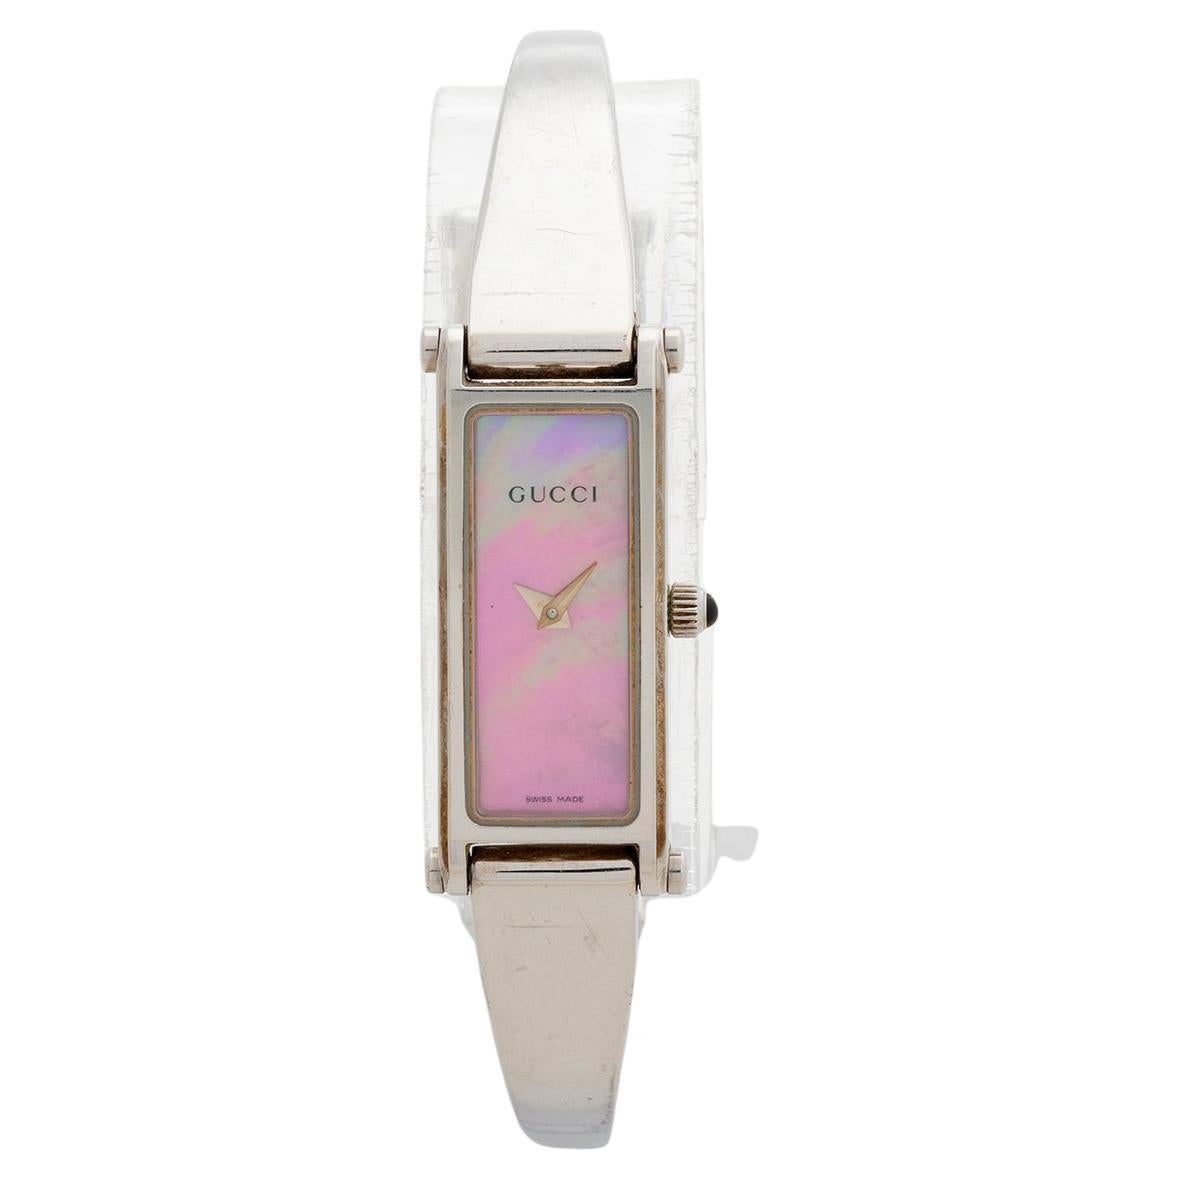 Our neo vintage quartz Gucci 1500L features a rarer polished stainless steel case with mother of pearl dial and medium size bracelet, to fit a wrist to c. 155mm. Presented in excellent condition with some signs of use overall, to be expected given